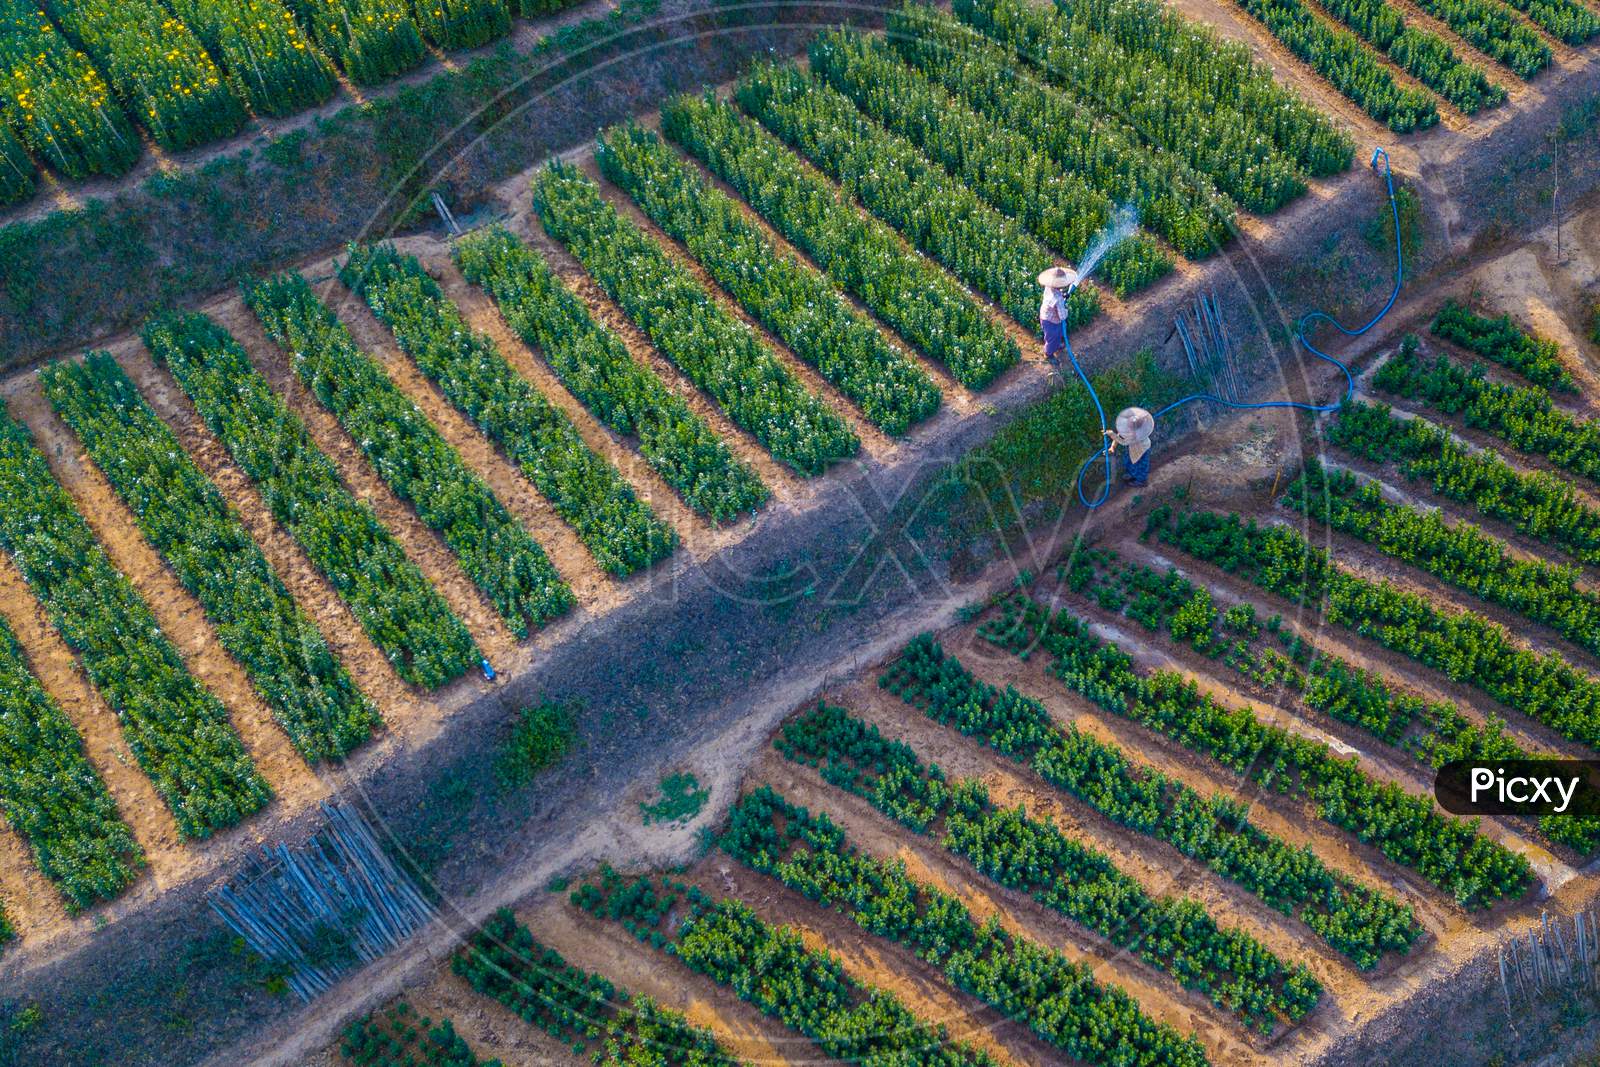 An aerial view of farmers watering plants in an agriculture field